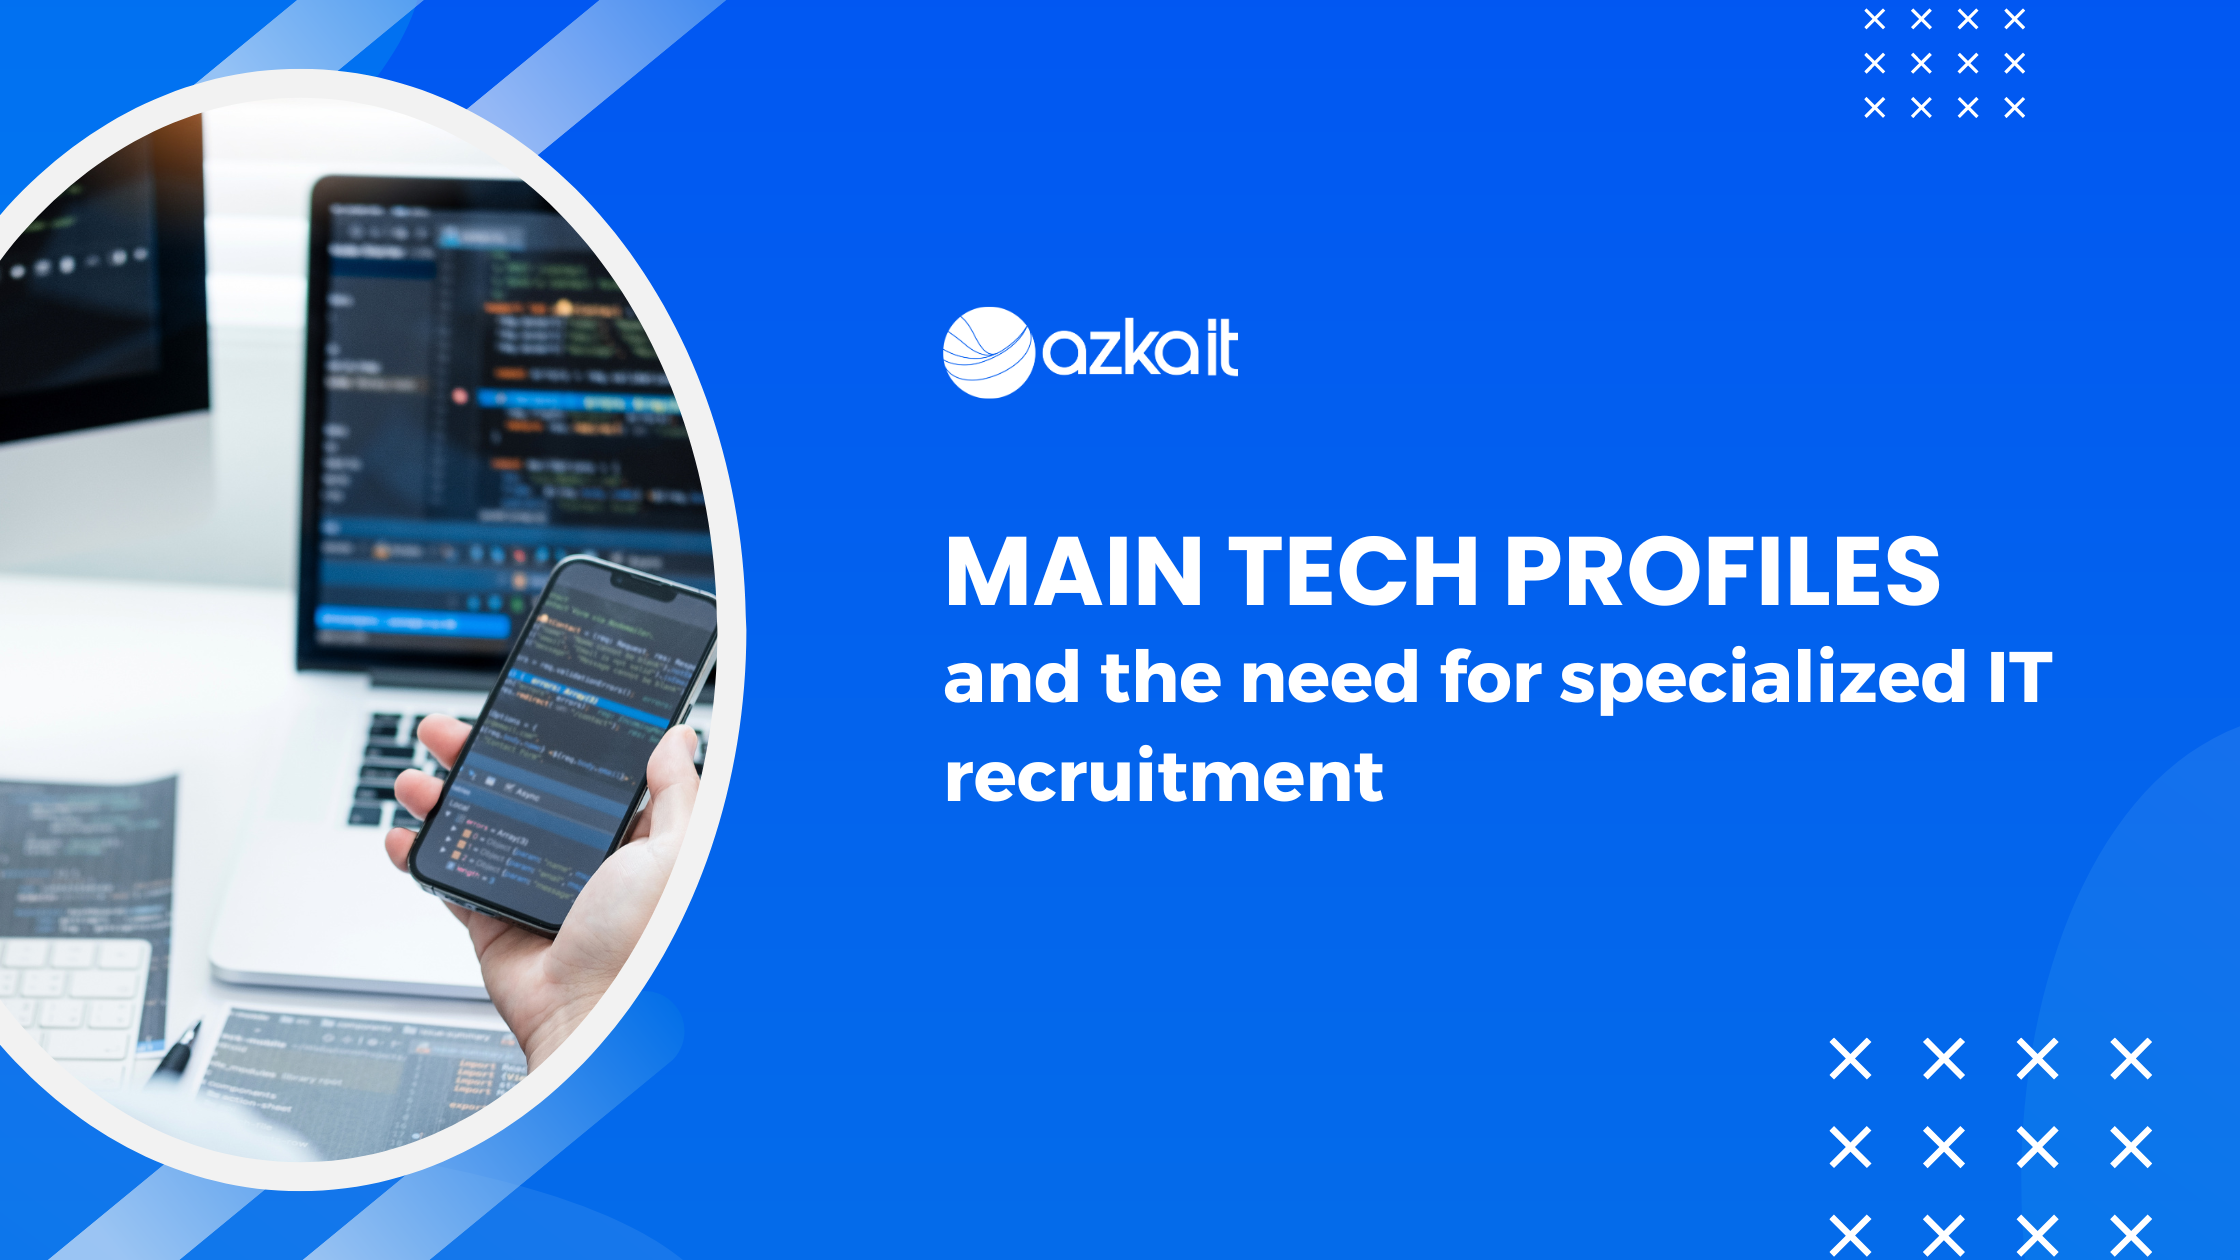 Main Tech profiles and the need for specialized IT recruitment